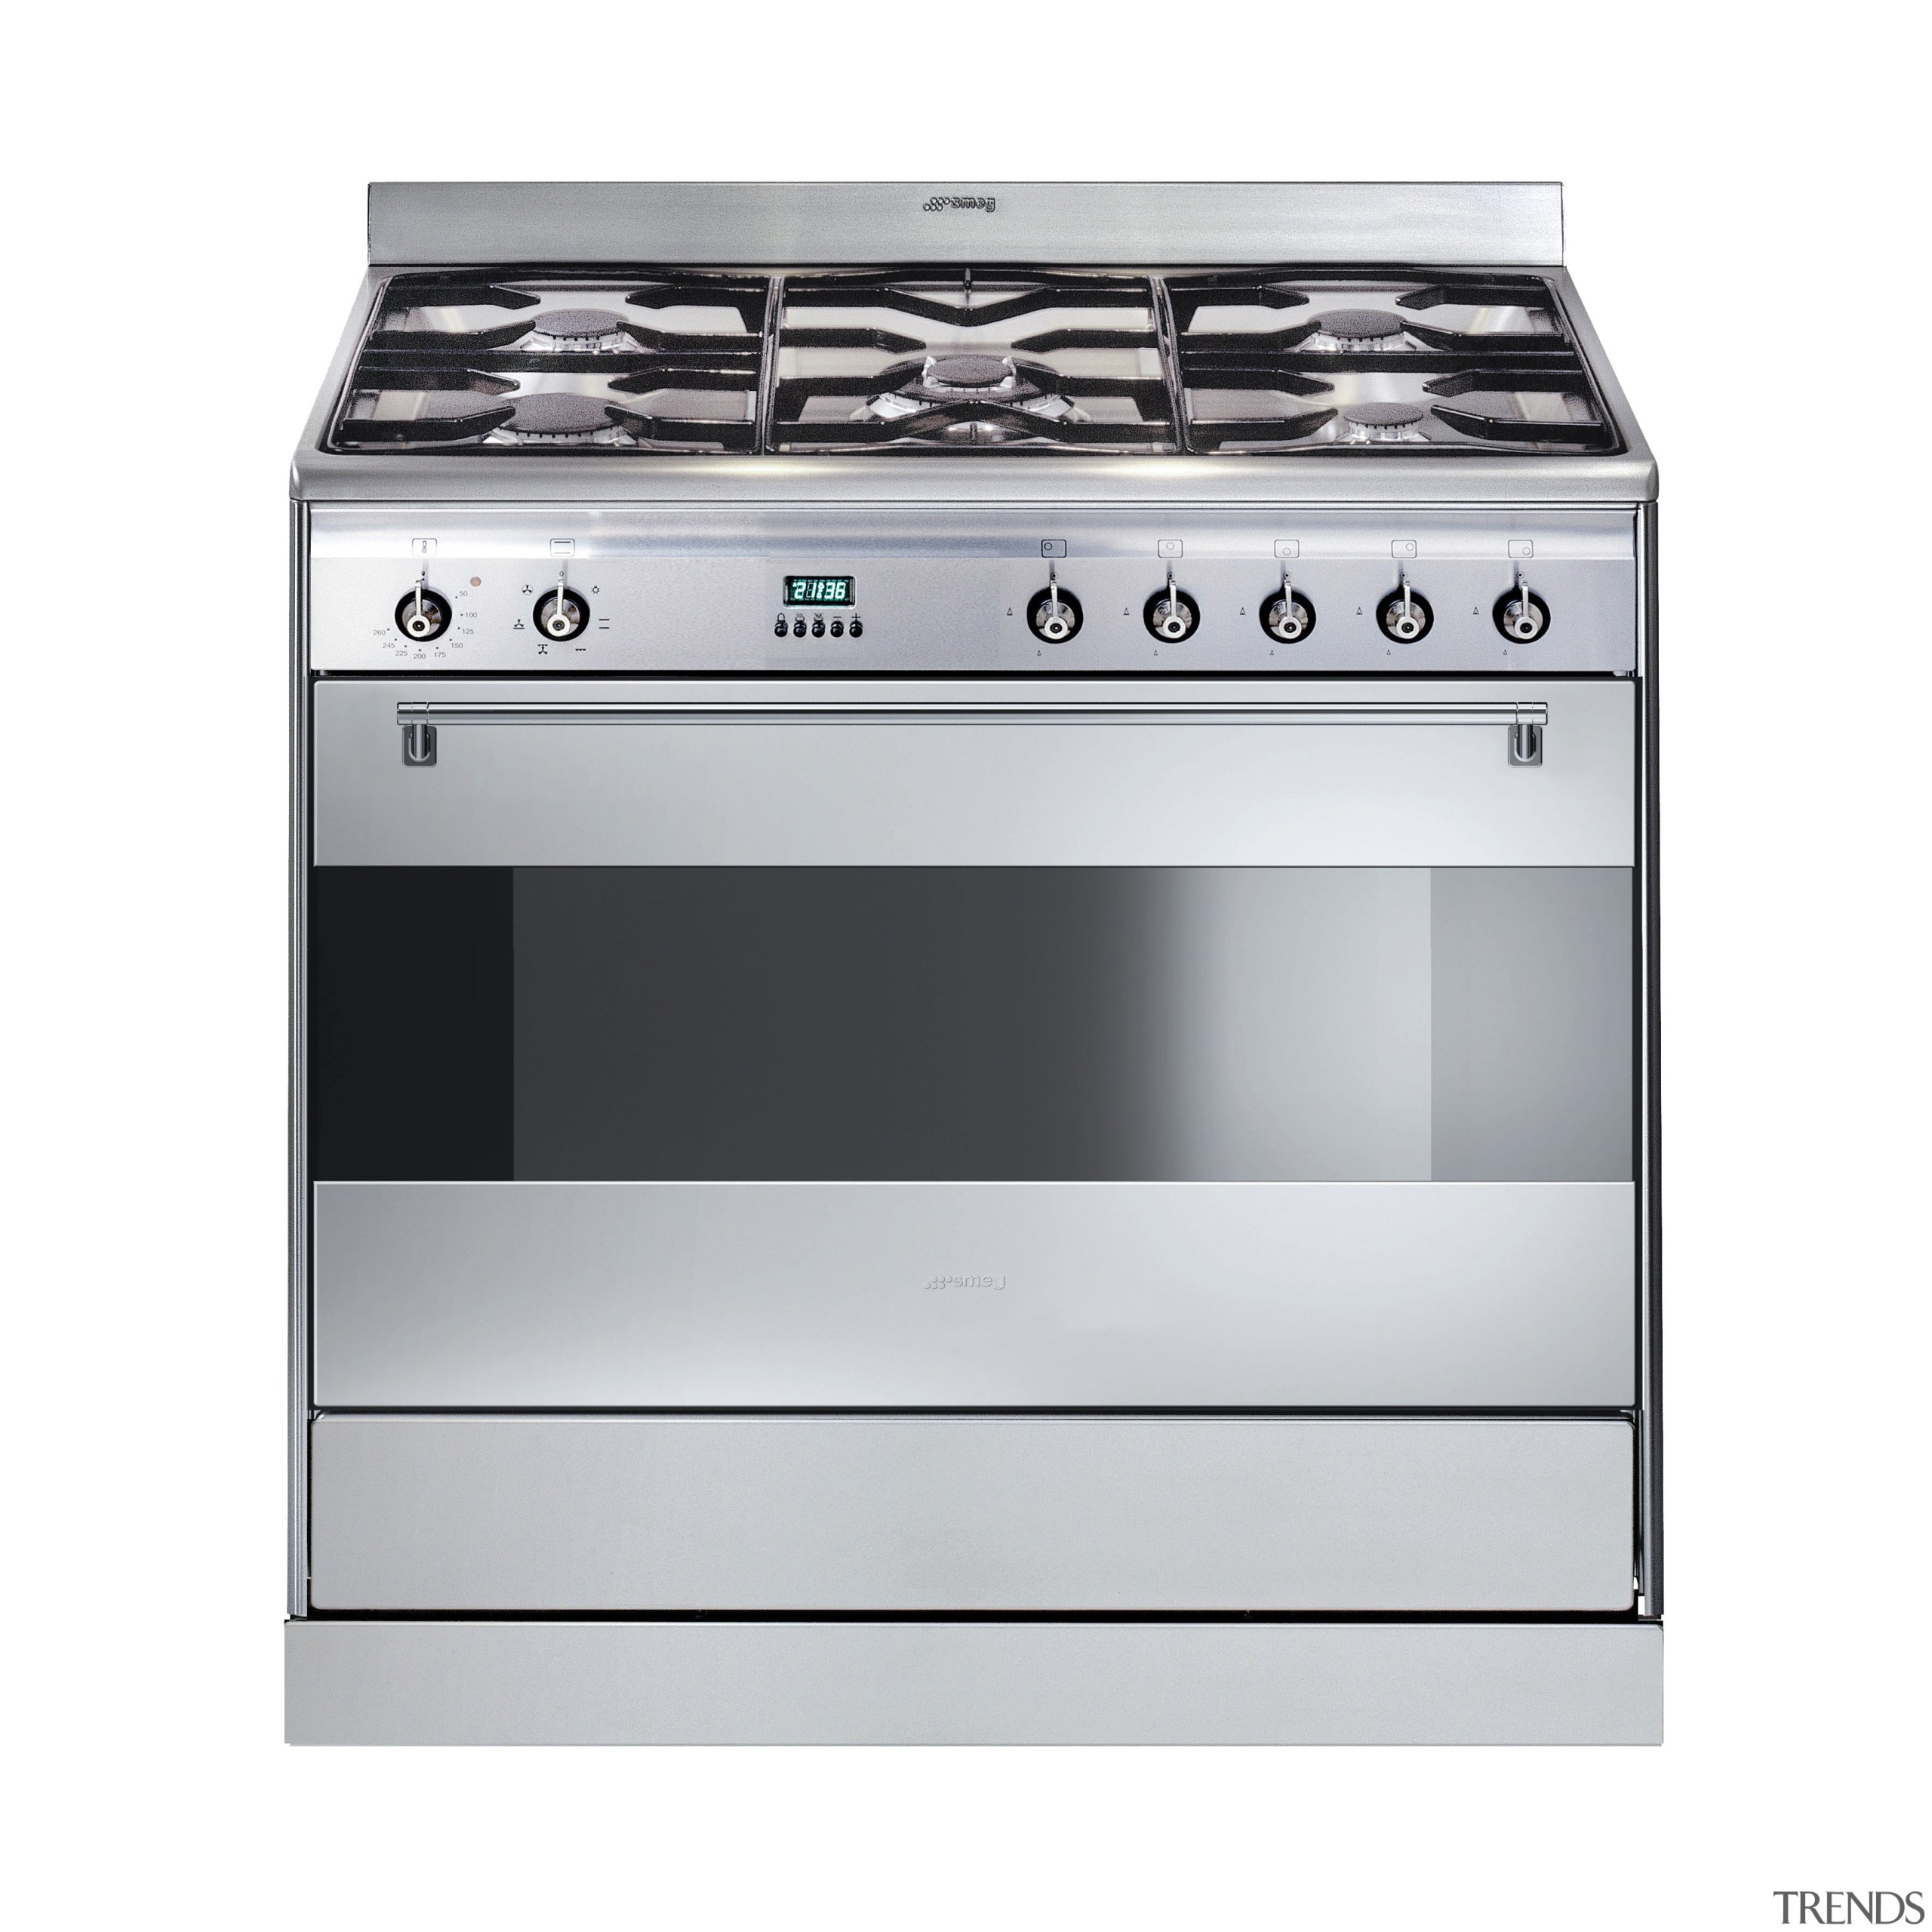 Freestanding cookers from Smeg highlight a significant design gas stove, home appliance, kitchen appliance, kitchen stove, major appliance, product, product design, white, gray